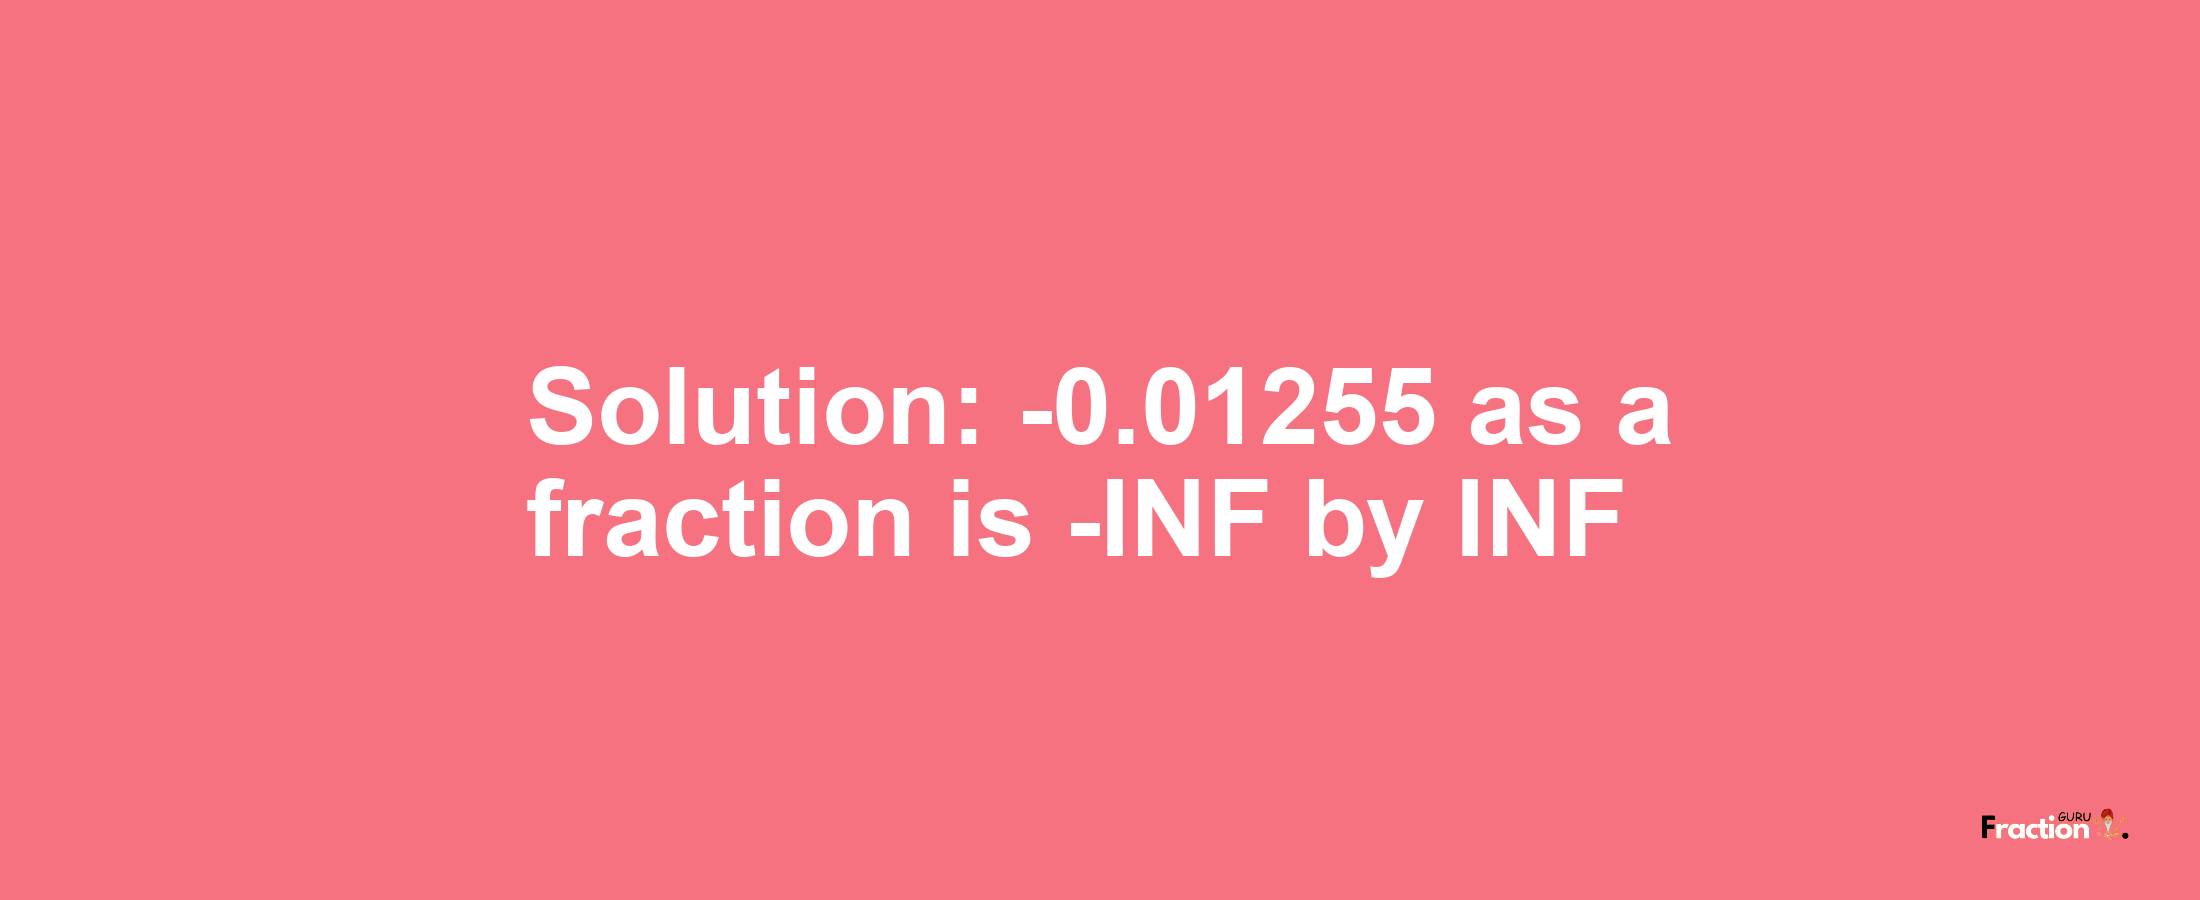 Solution:-0.01255 as a fraction is -INF/INF